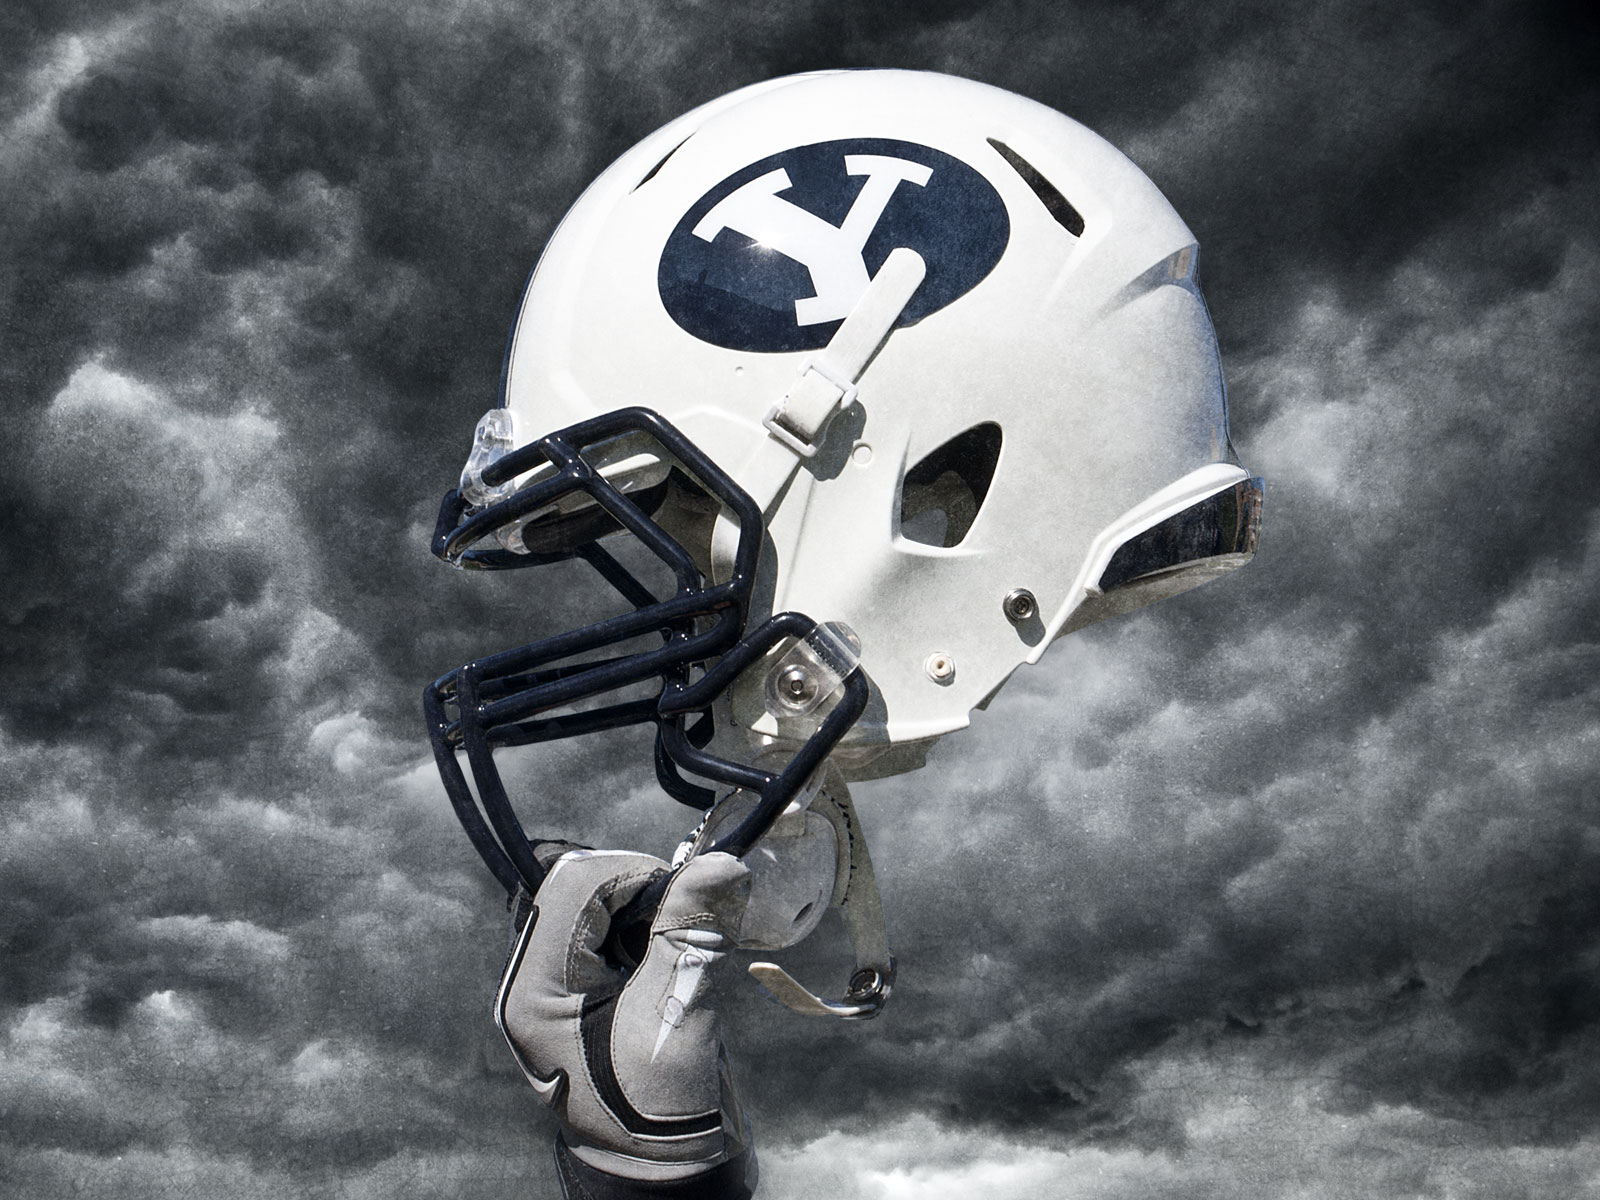 Byu Wallpaper By Byusportscamps